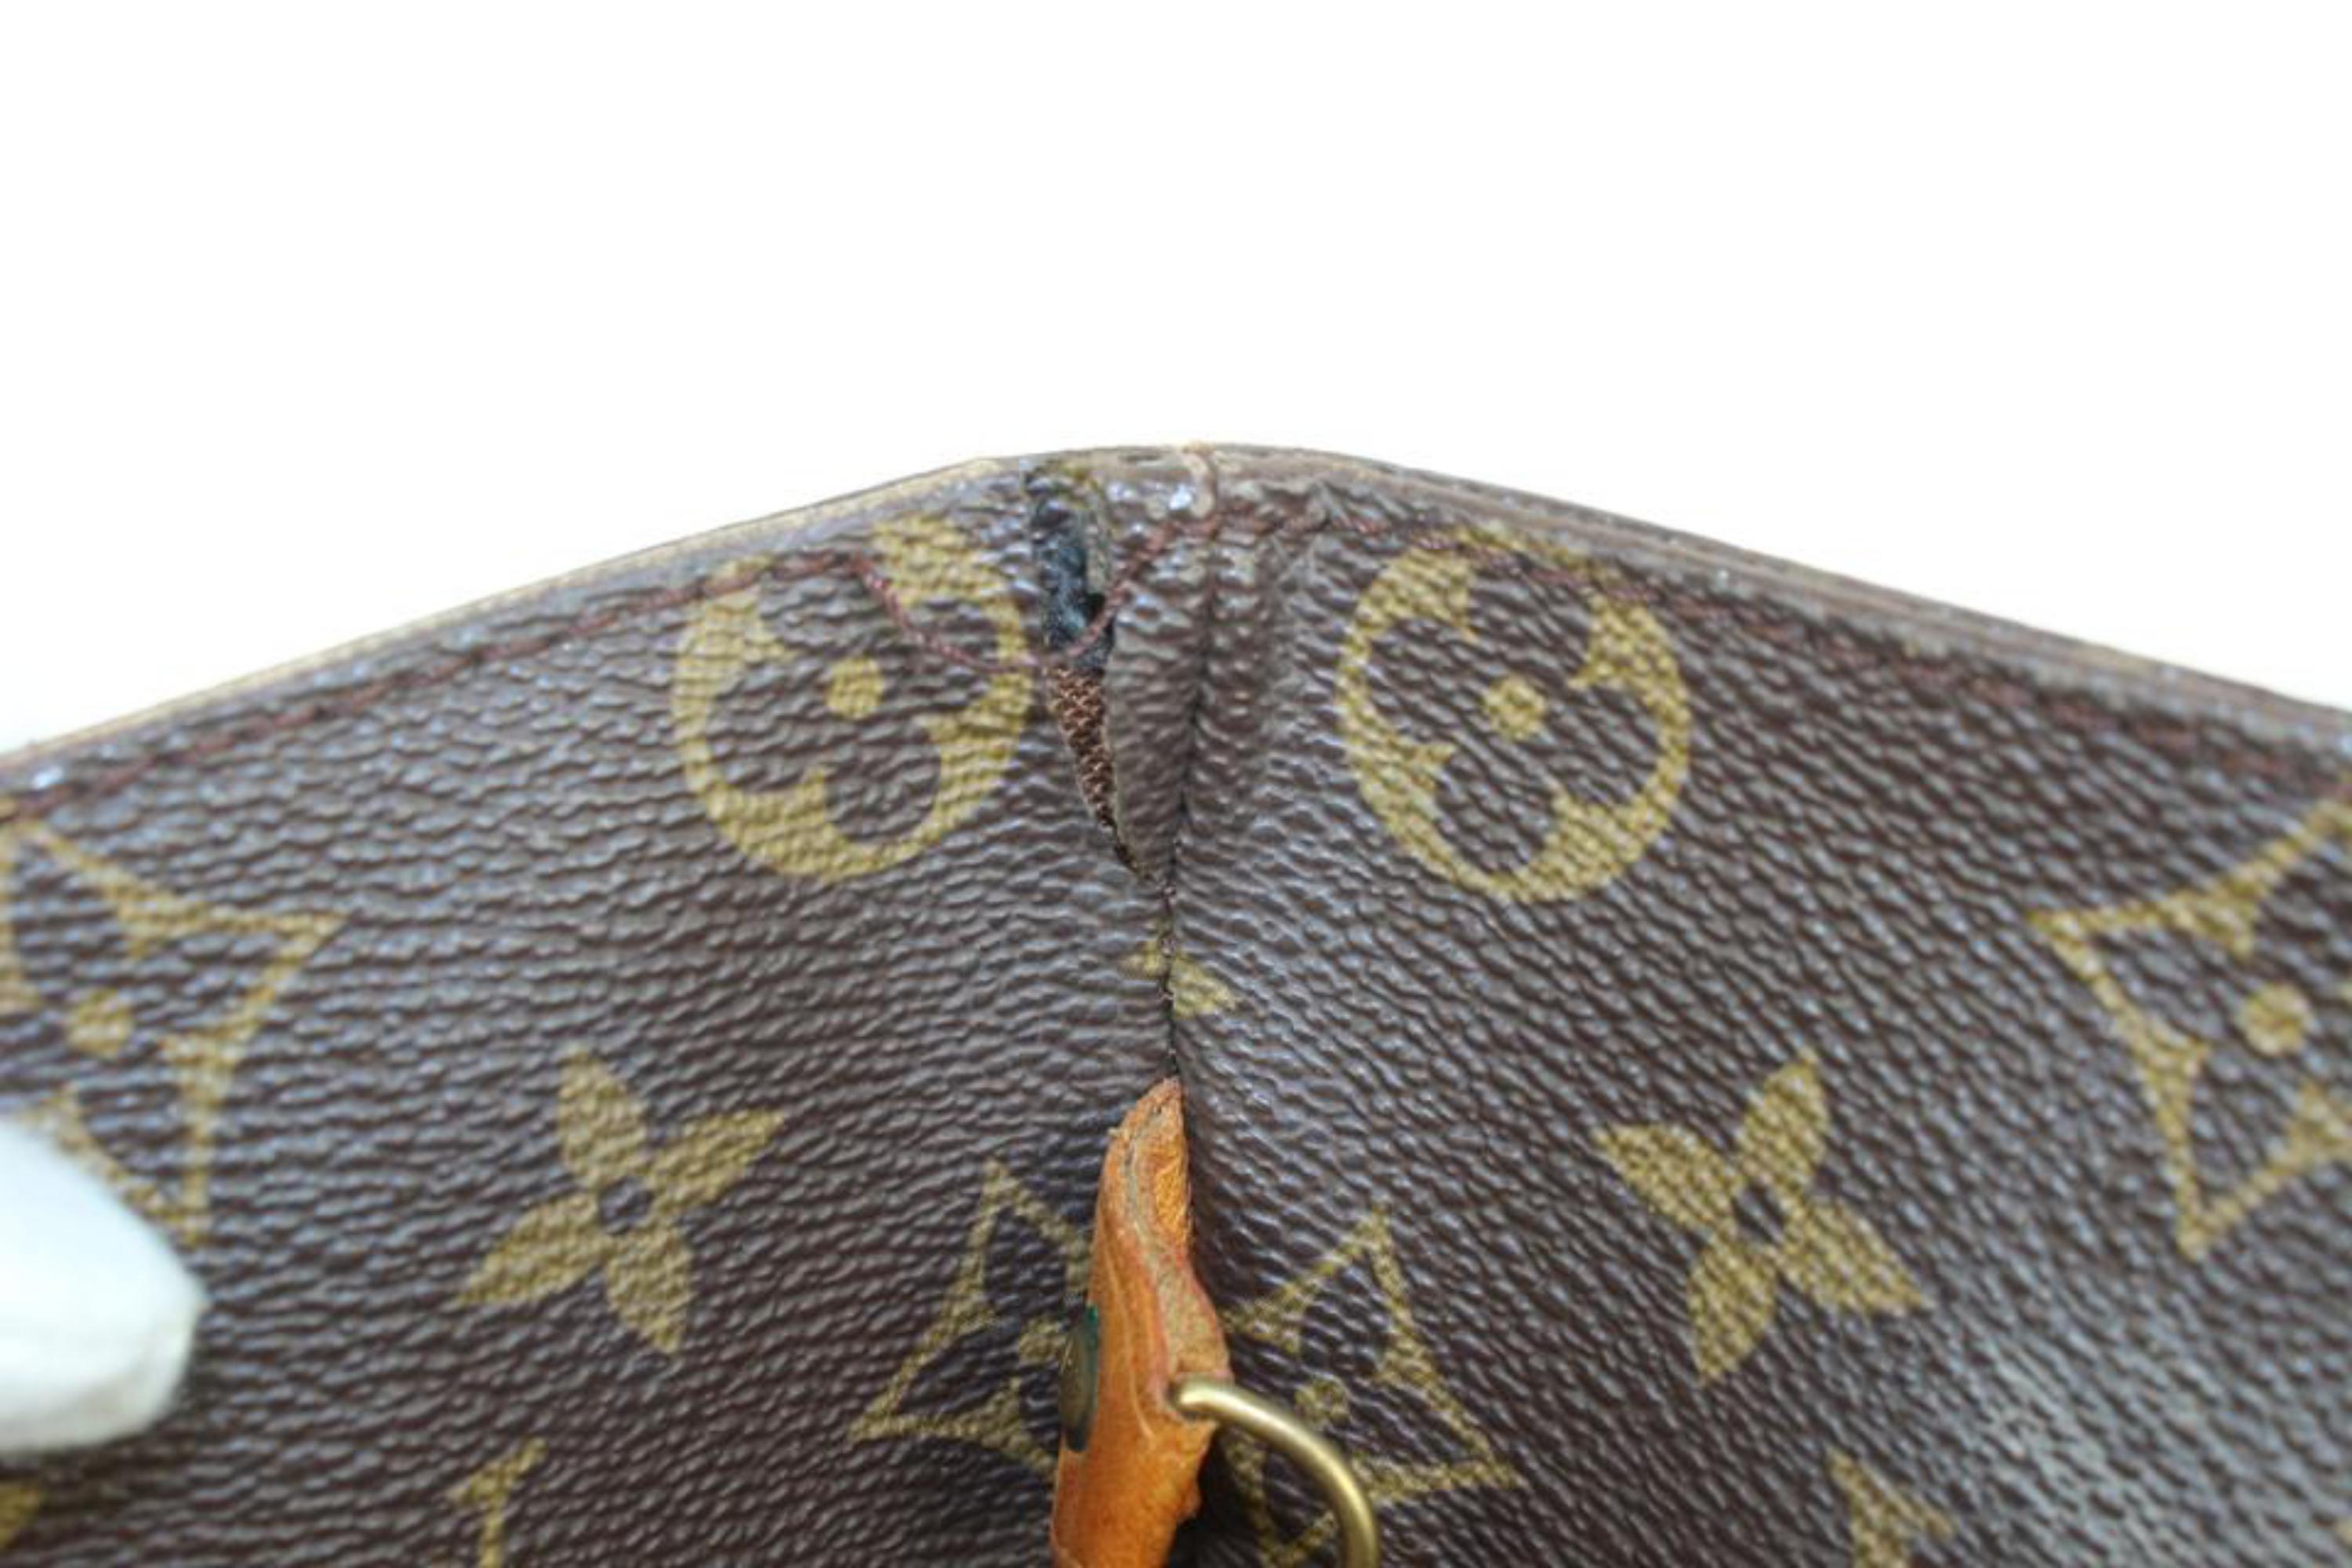 Louis Vuitton Monogram Sac Shopping Tote Bag 7LZ1019 In Fair Condition For Sale In Dix hills, NY